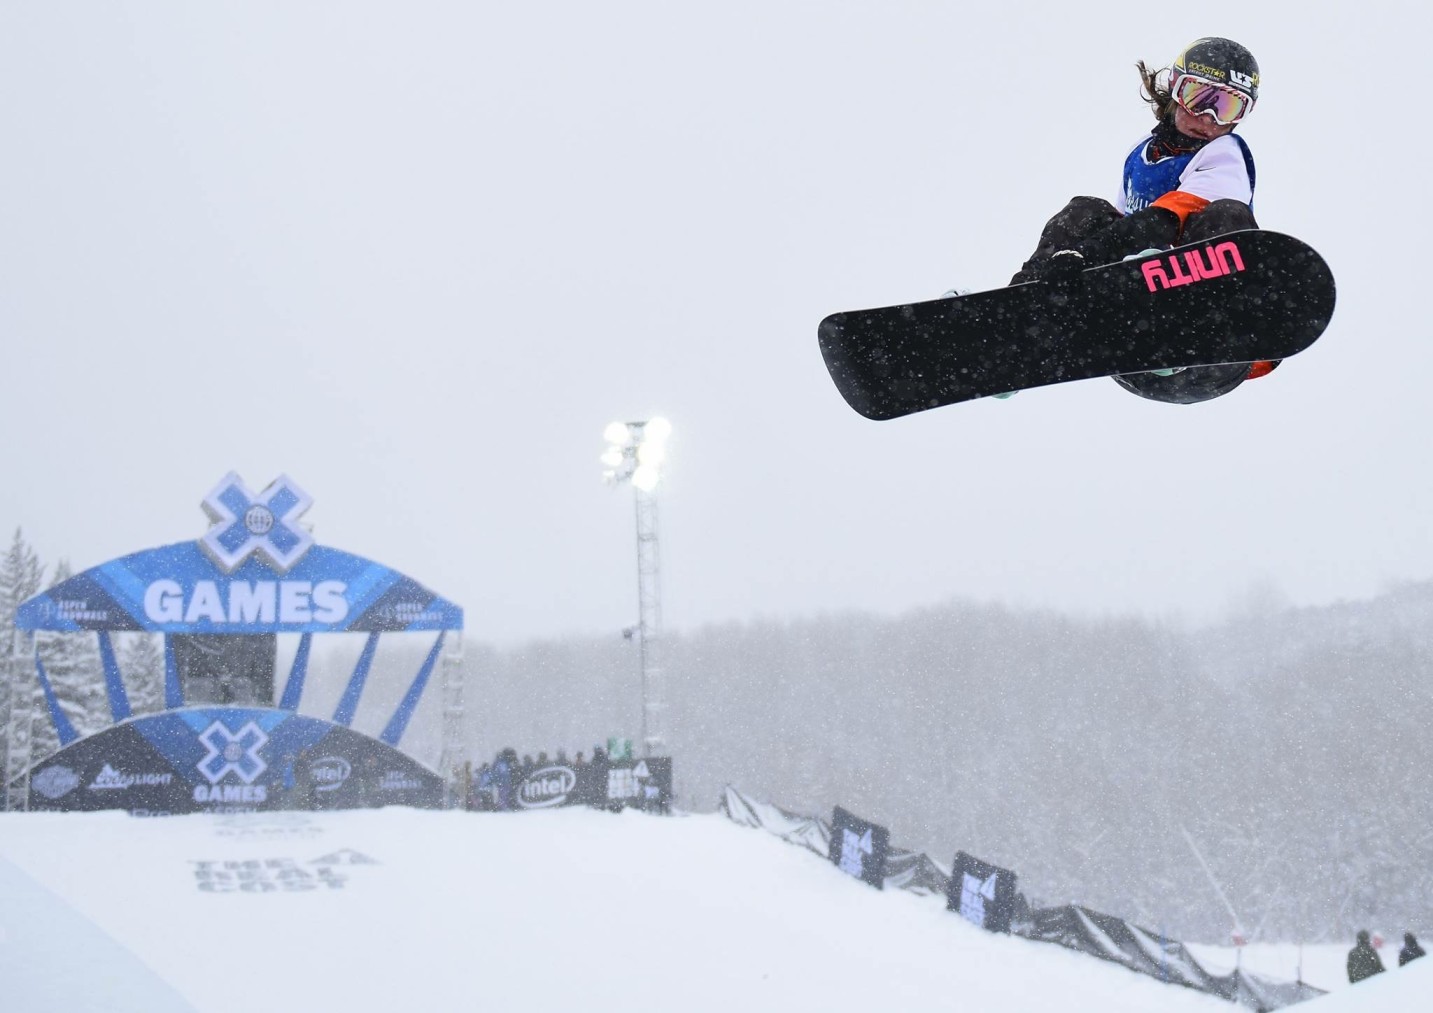 Arielle Gold at the Winter X Games